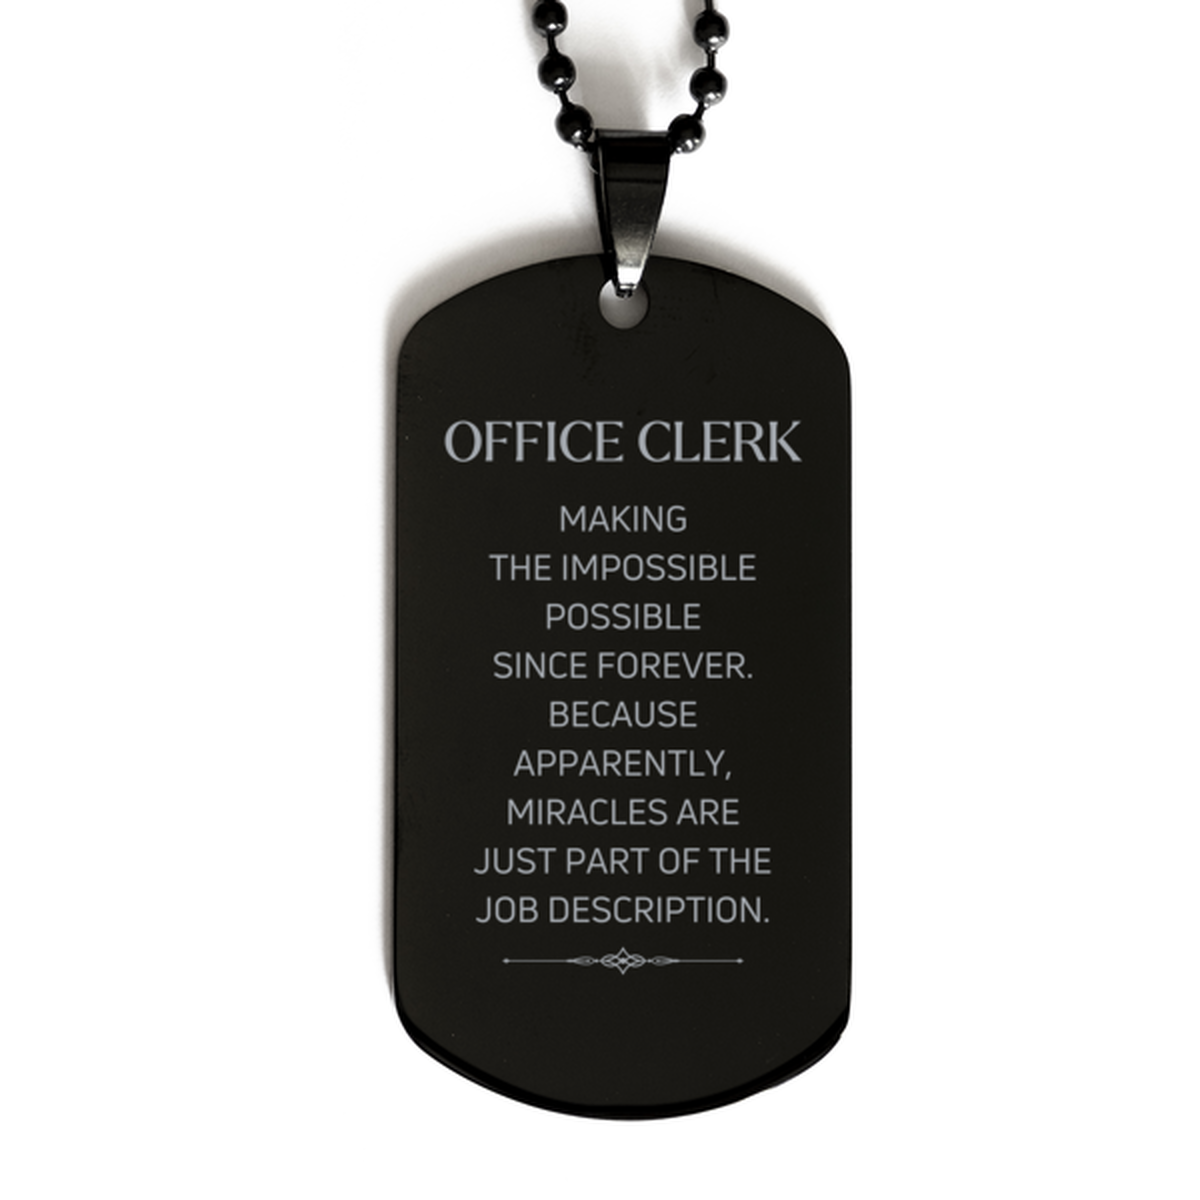 Funny Office Clerk Gifts, Miracles are just part of the job description, Inspirational Birthday Black Dog Tag For Office Clerk, Men, Women, Coworkers, Friends, Boss